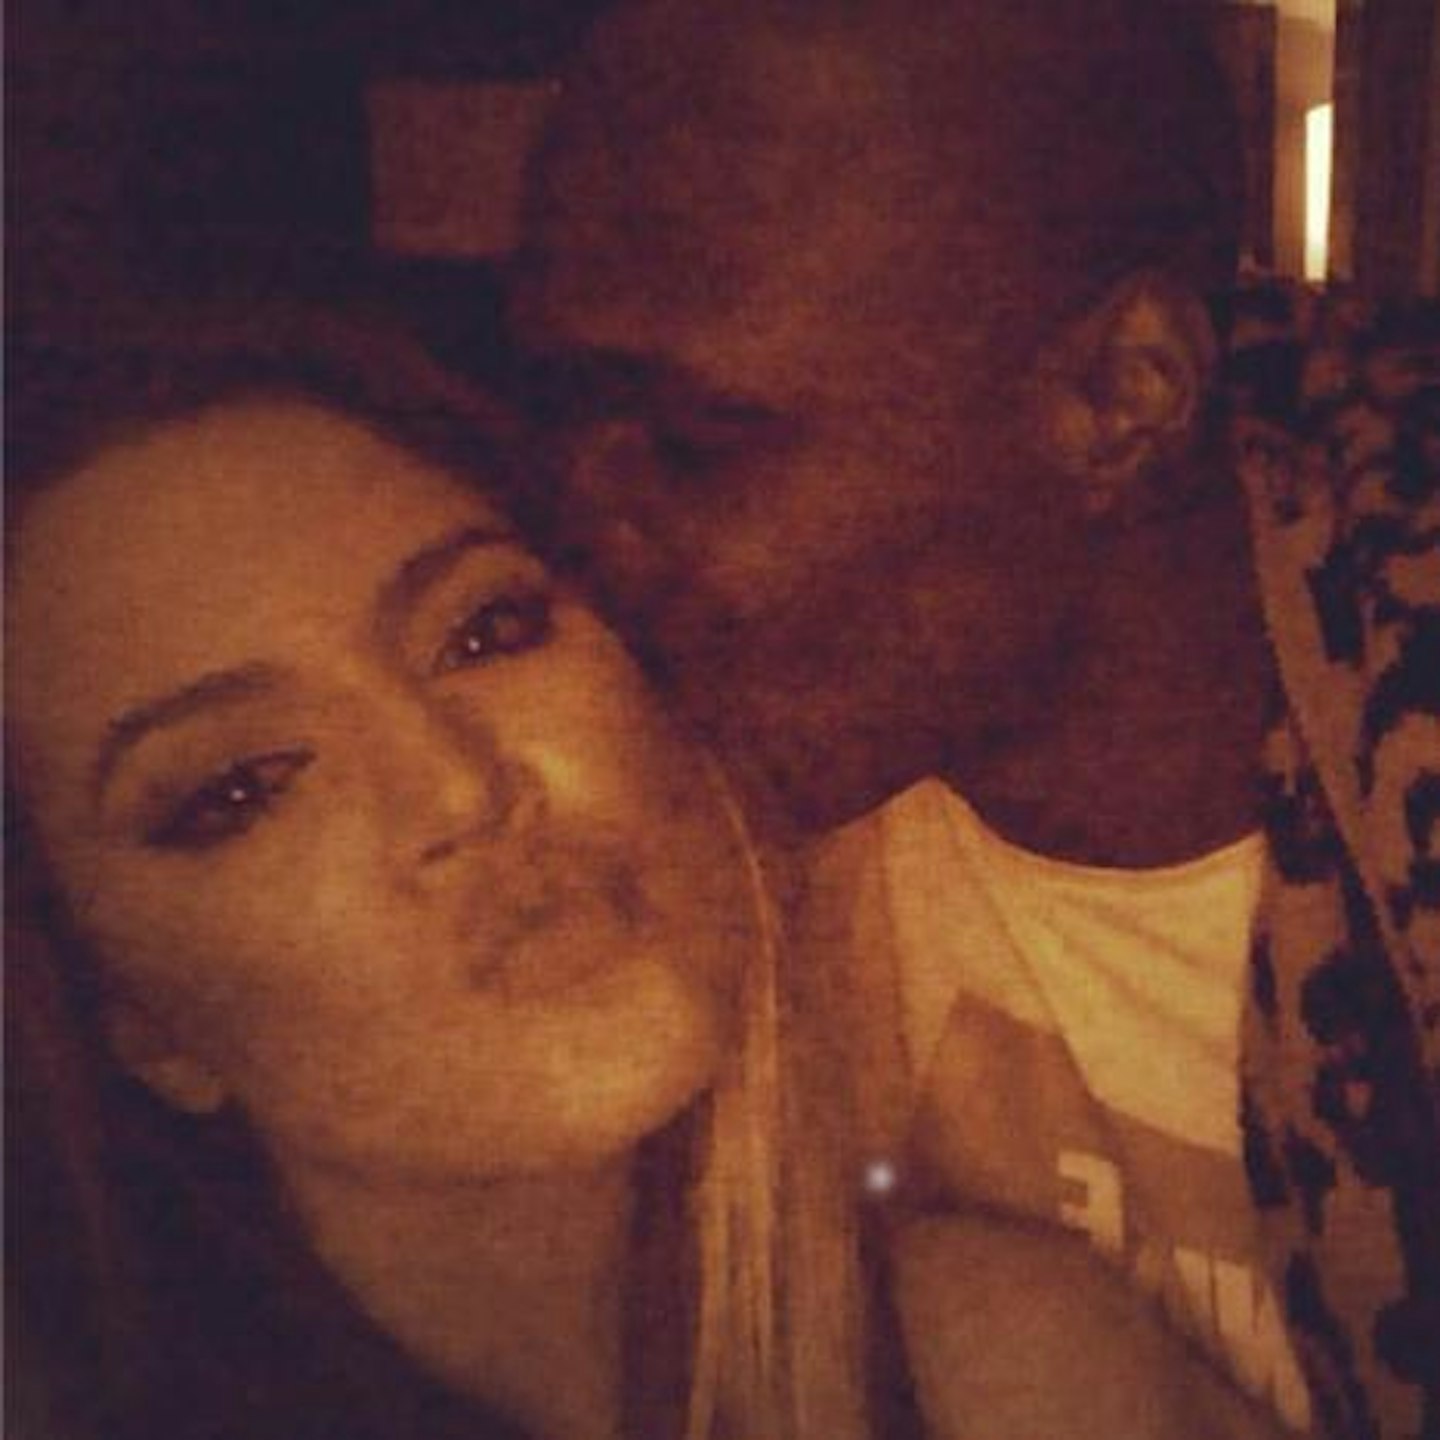 Khloe Kardashian and Lamar Odom have always been a very loving couple